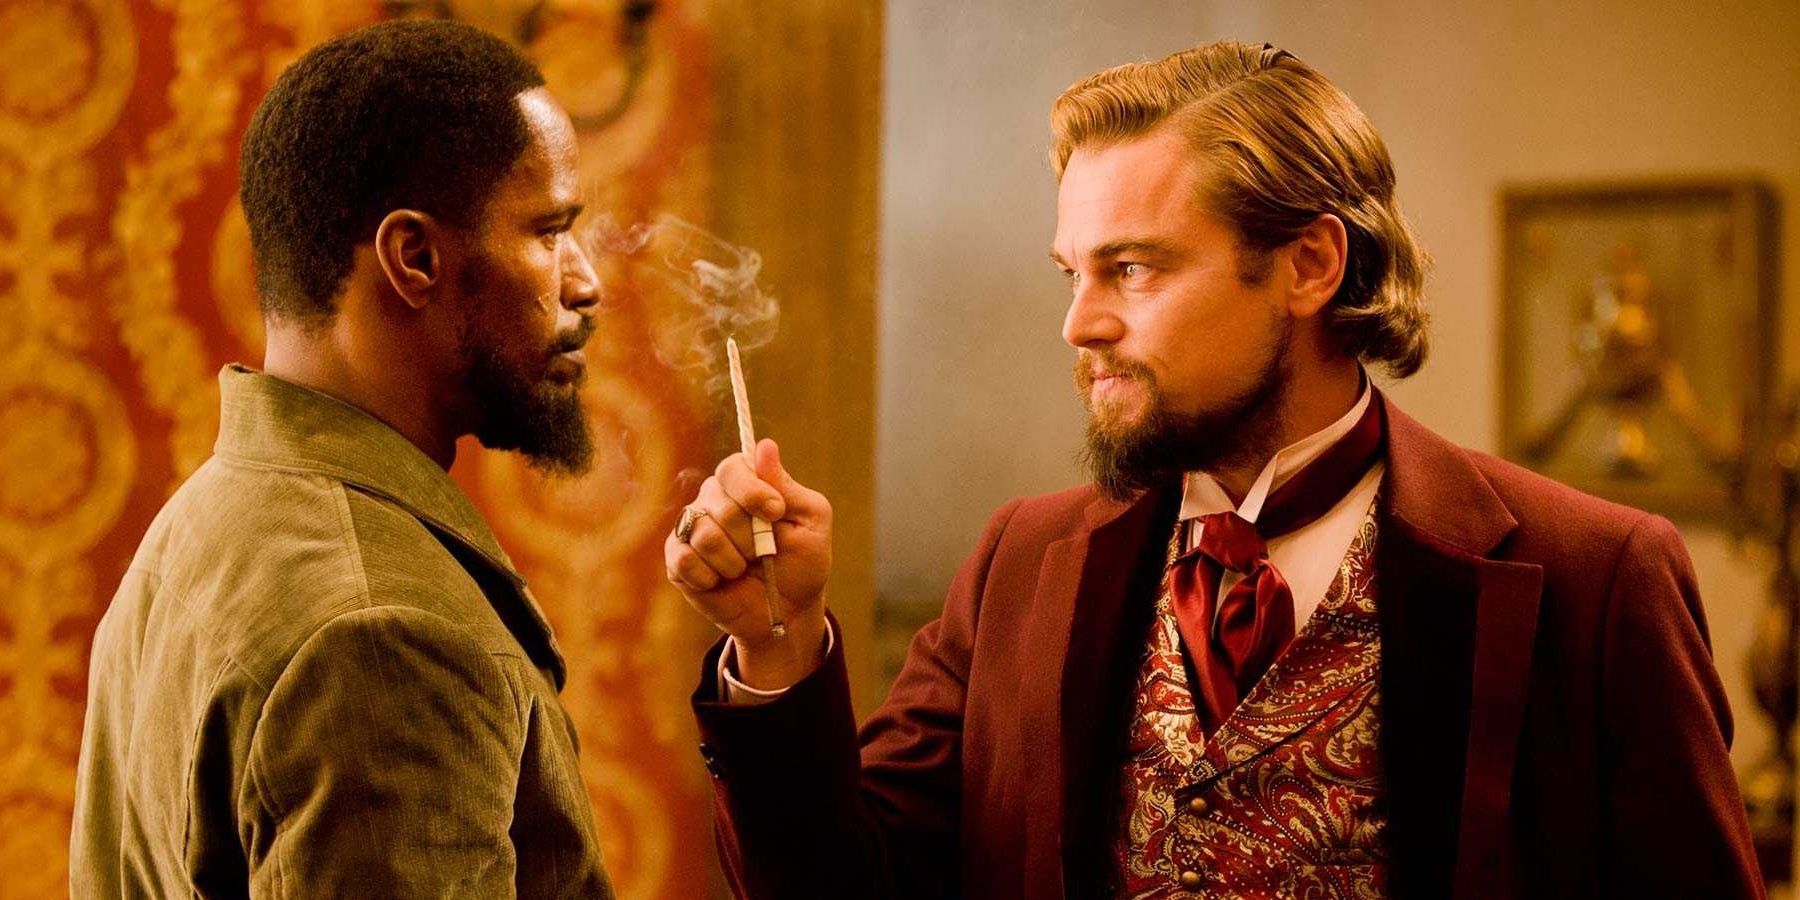 django-unchained-actors-mistakes-made-it-into-movie